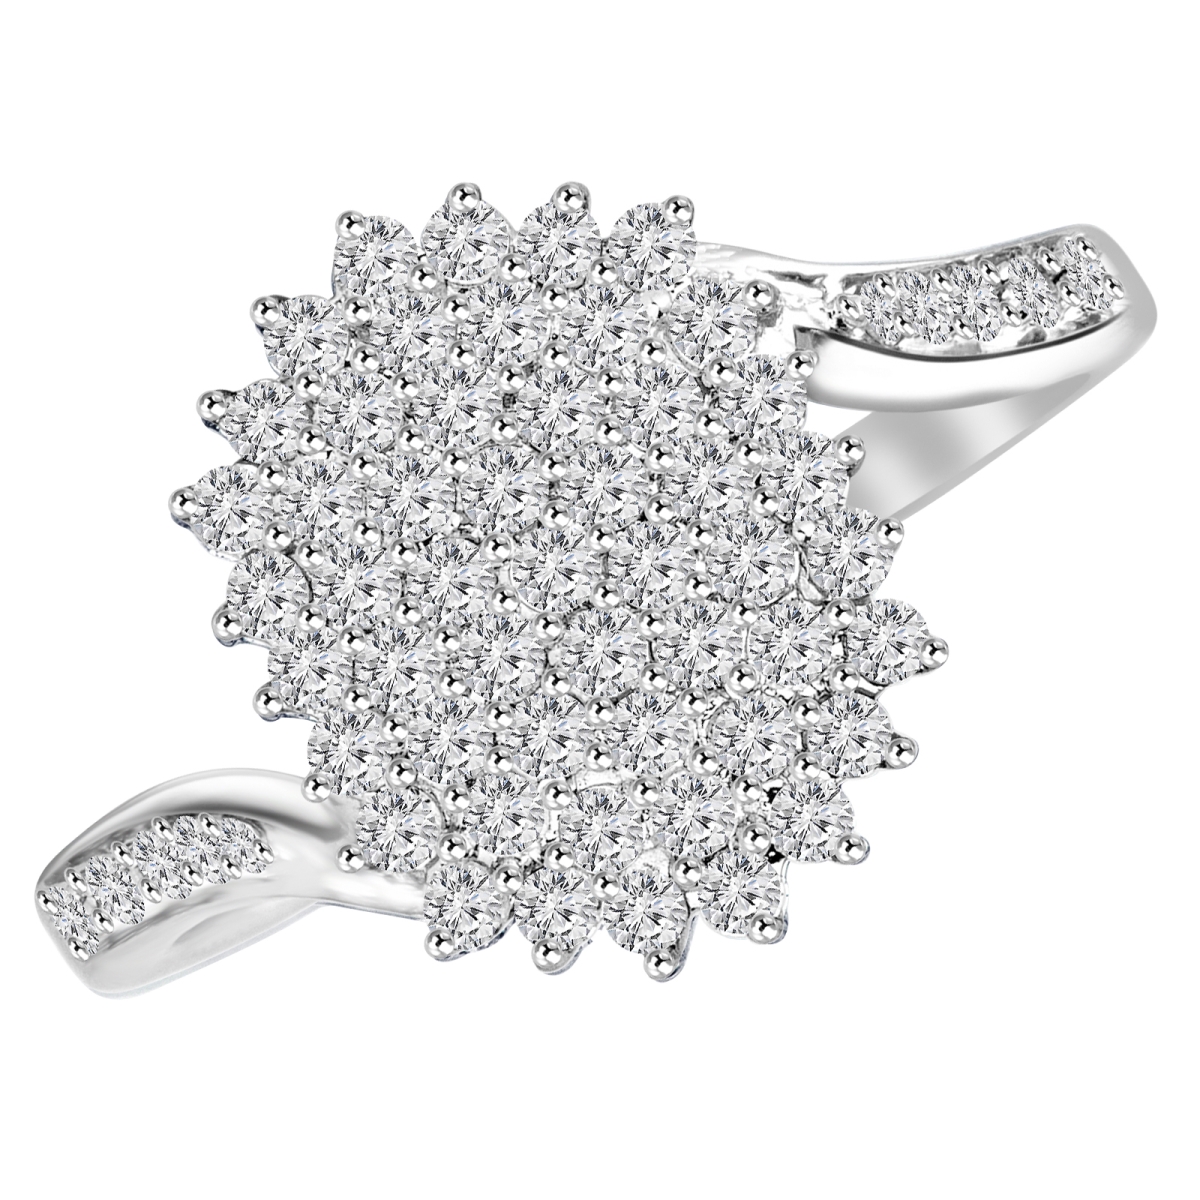 Picture of Majesty Diamonds MDR160007-P 0.5 CTW Round Diamond Cluster Cocktail Ring in 14K White Gold